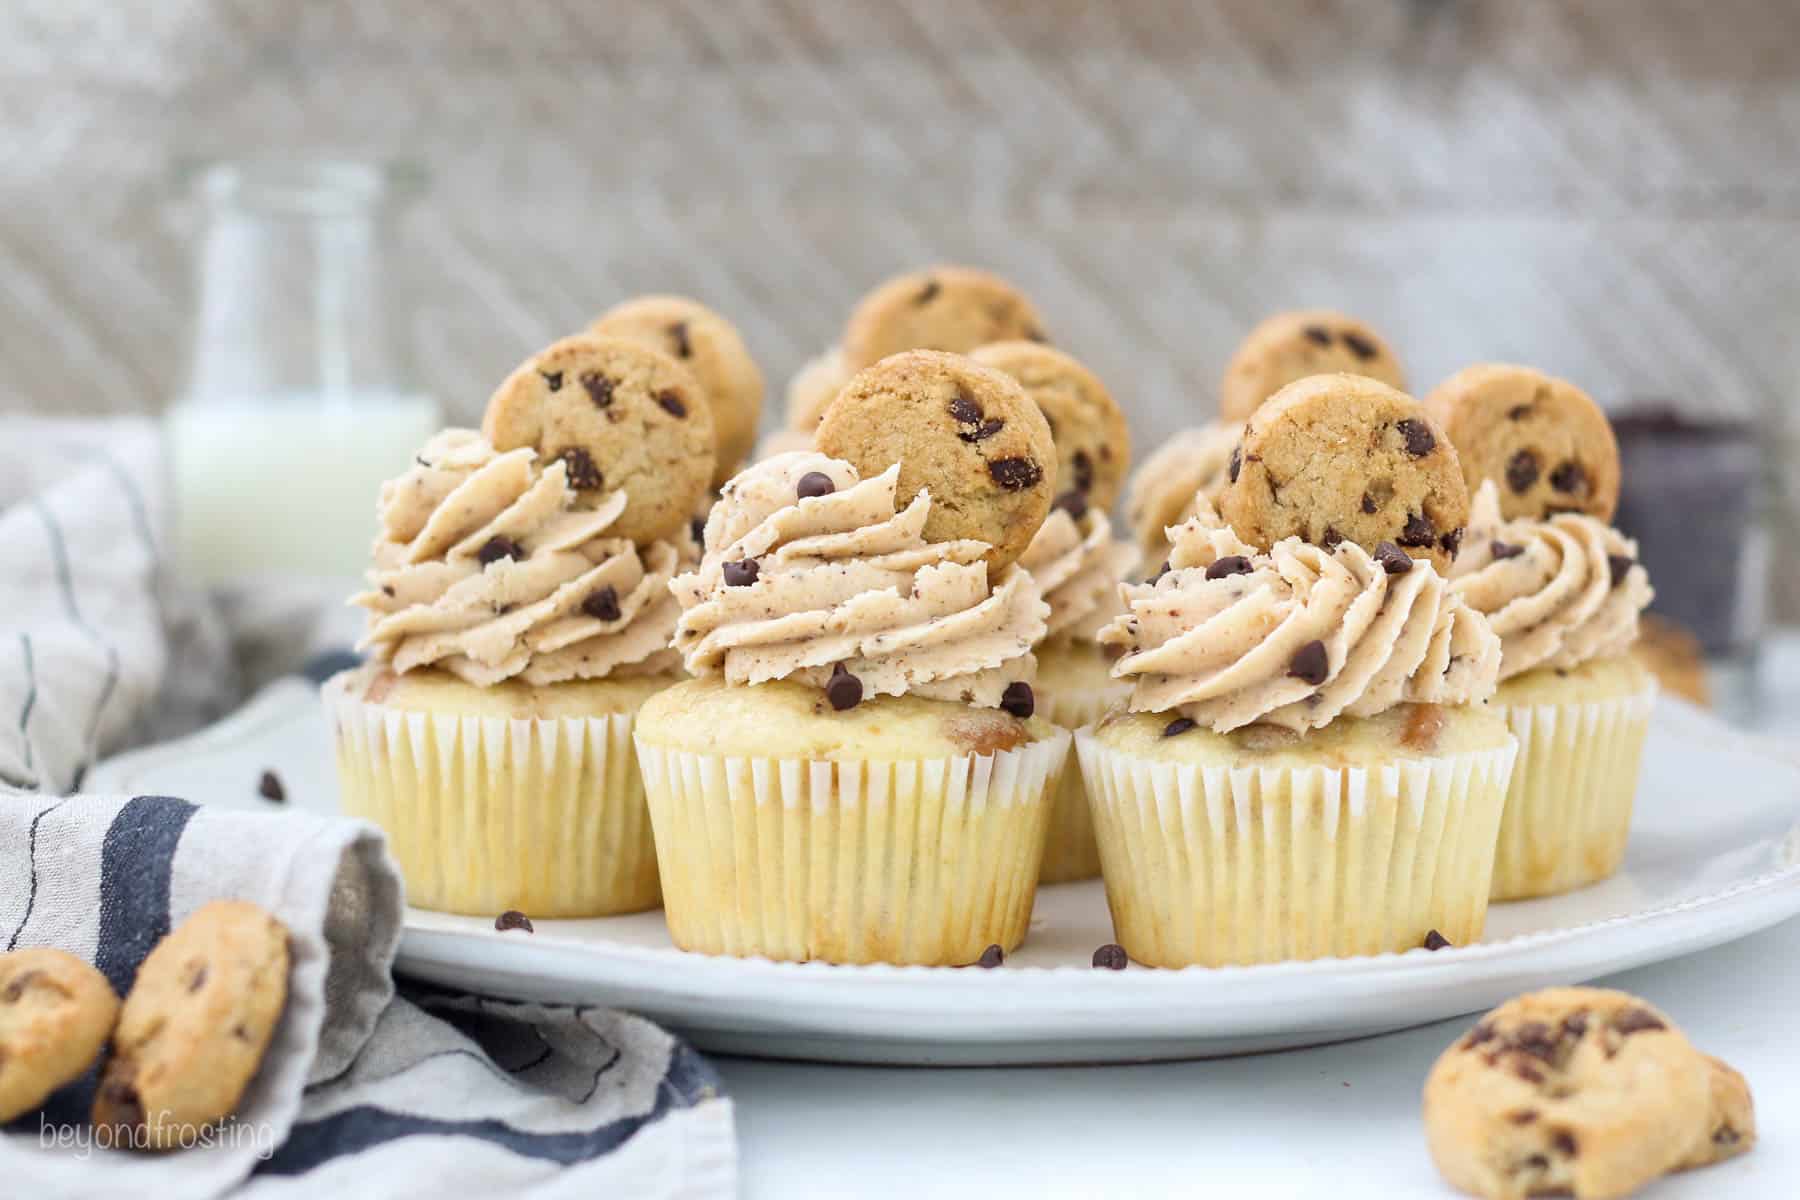 A large plate with Chocolate Chip Cookie Cupcakes